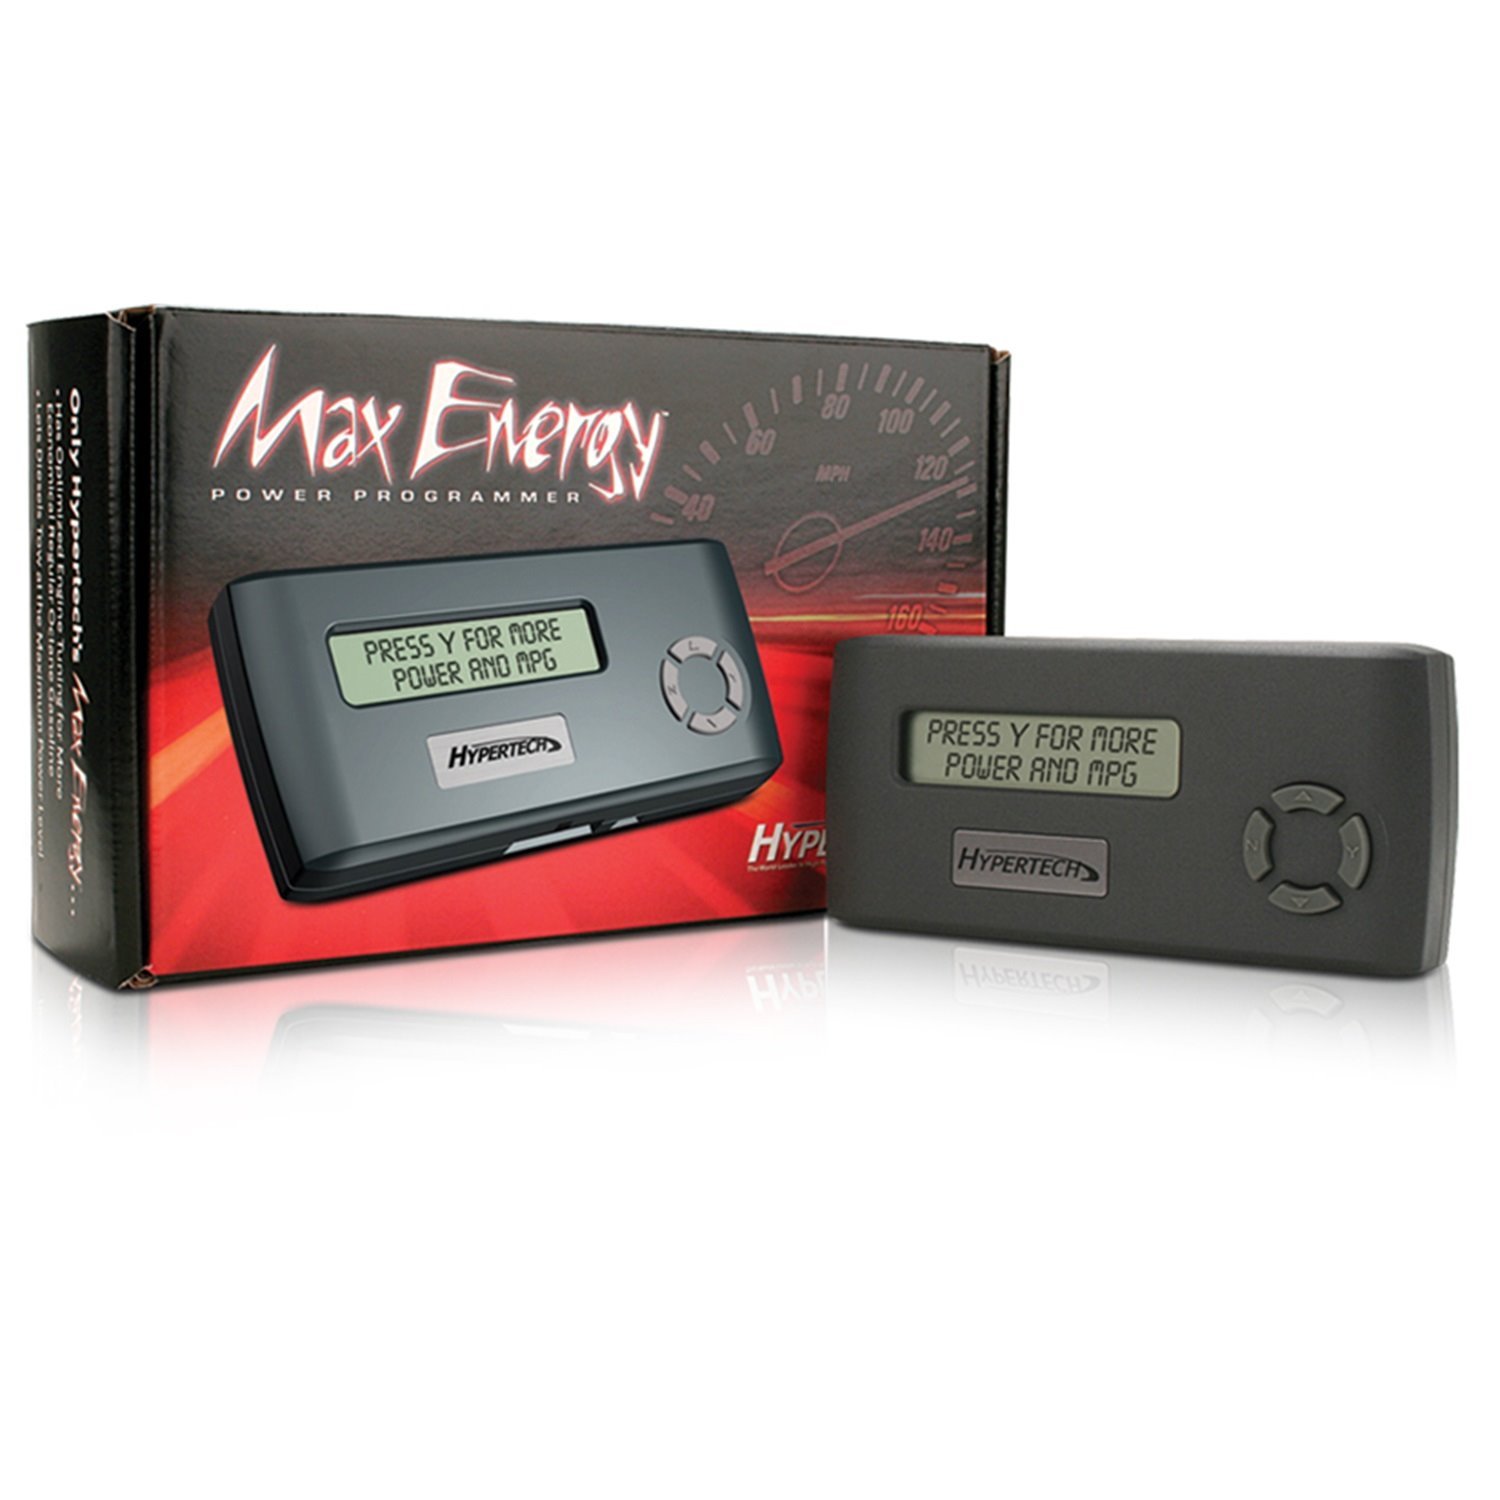 Max Energy Programmer 2004-14 Ford Gas Car/Truck/SUV